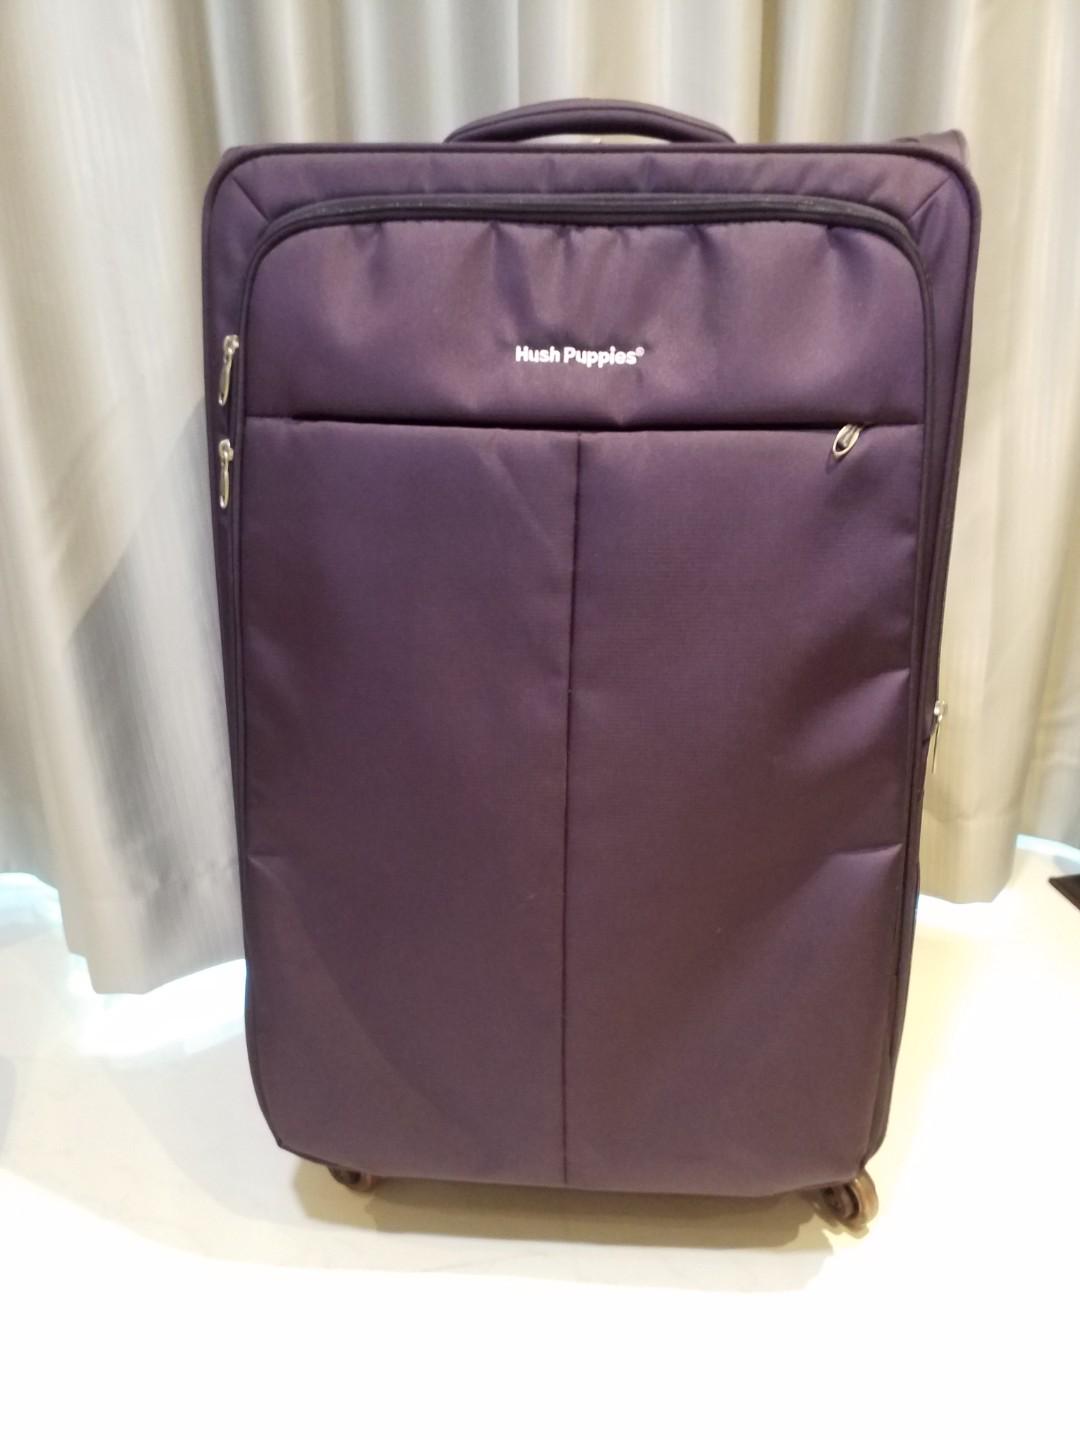 Hush puppies luggage 29 inch, Hobbies & Toys, Travel, Luggage on